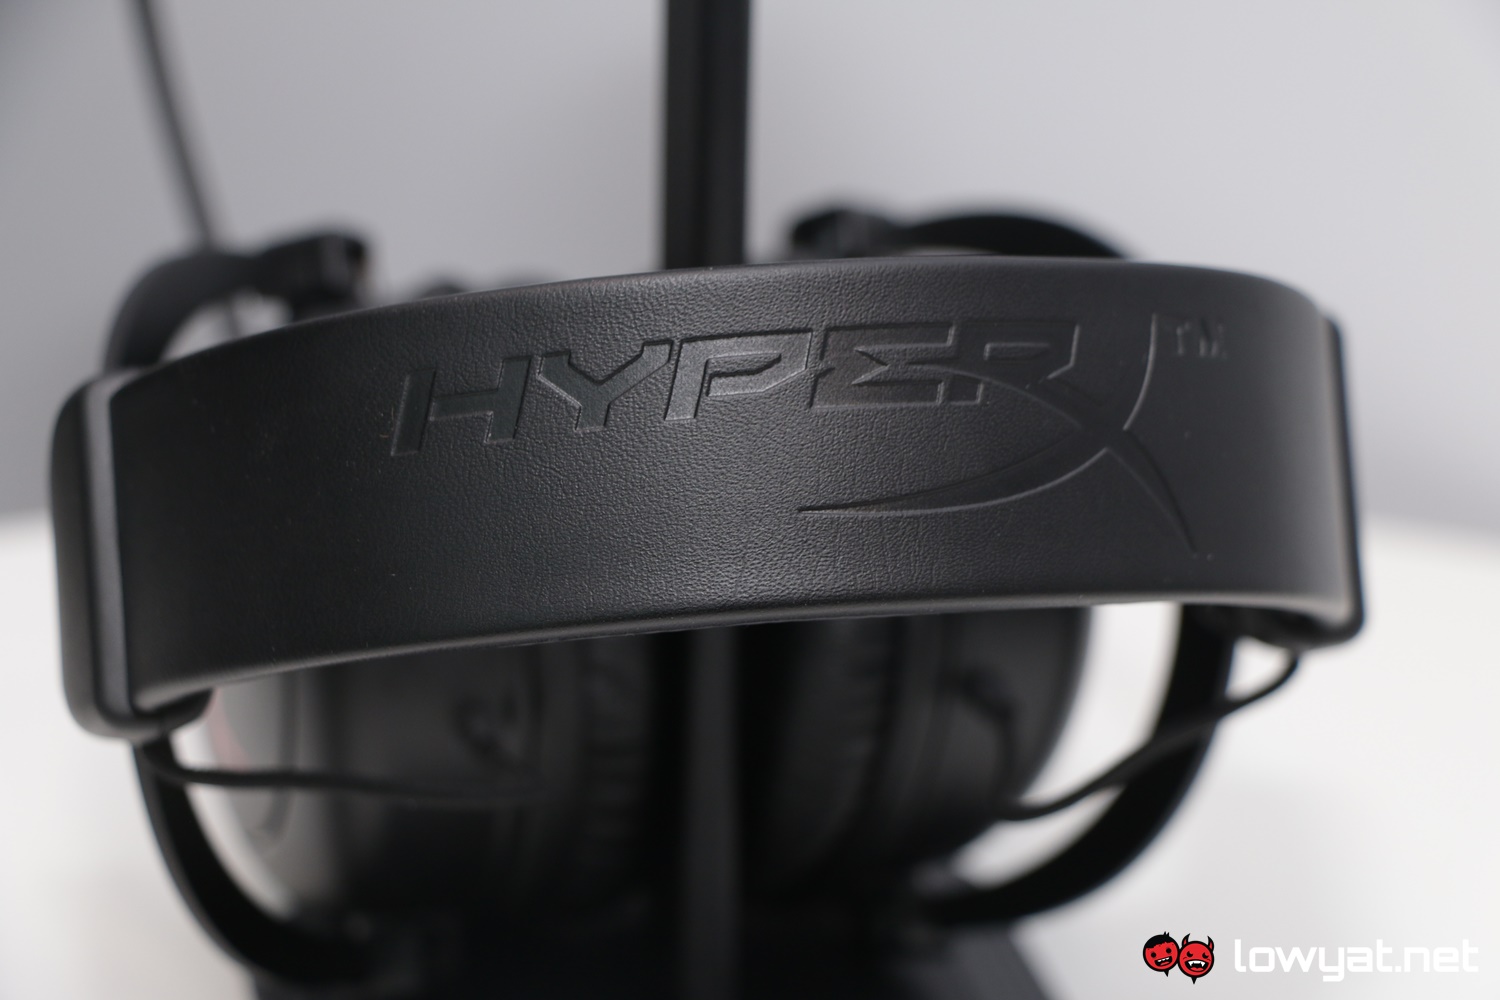 HyperX Cloud 3 Wireless gaming headset review